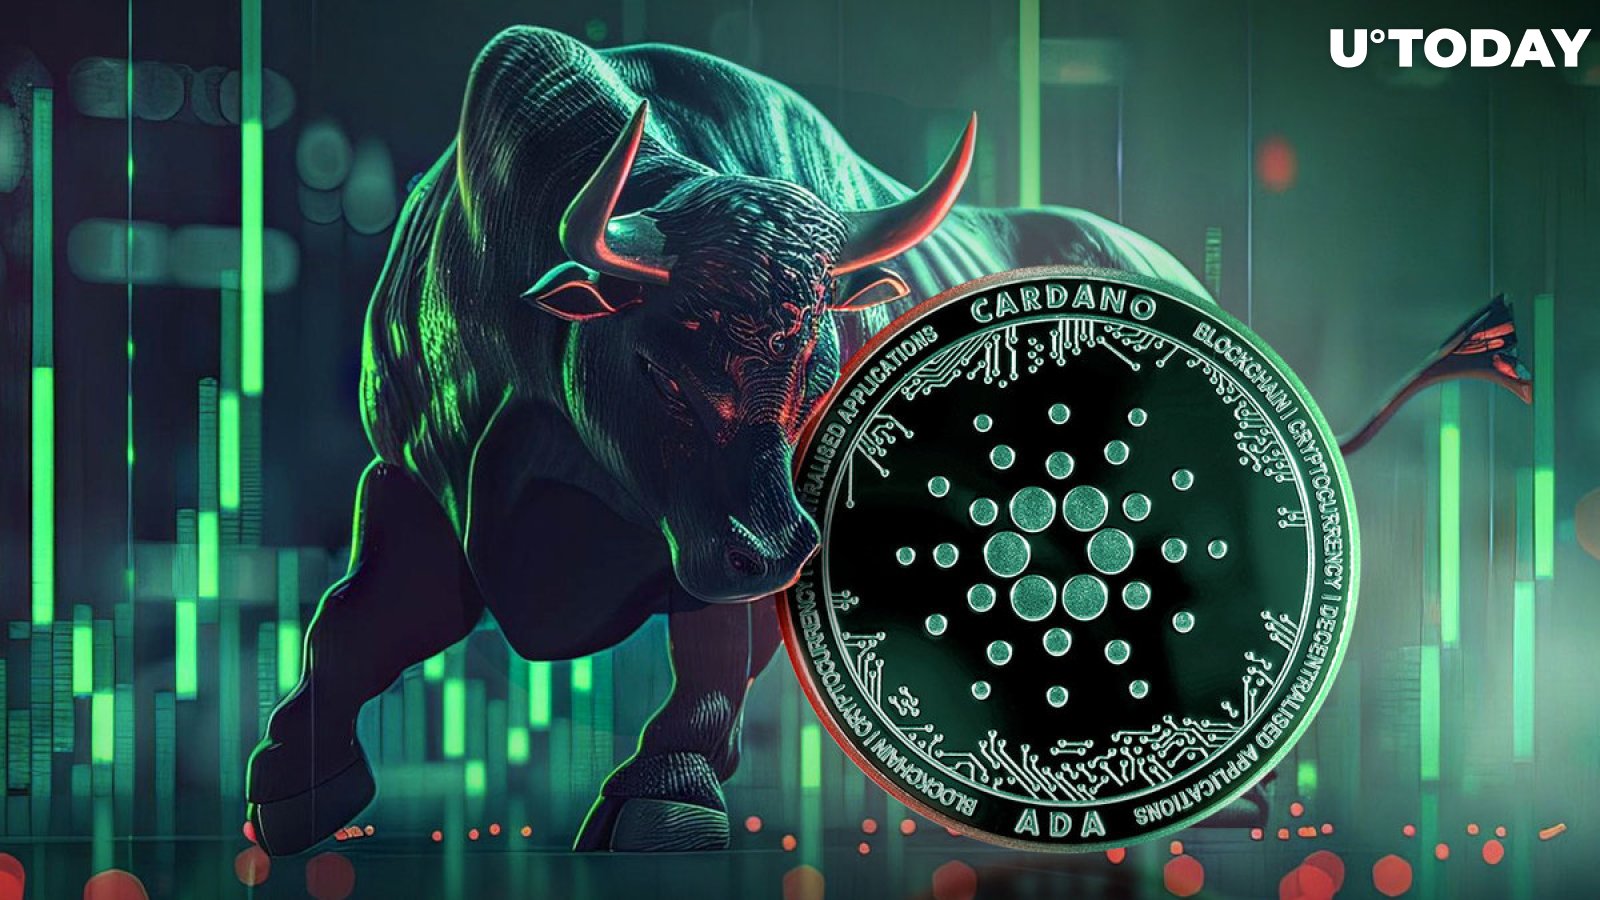 Cardano (ADA) Skyrockets 500% in Fund Flows as Bulls Take Charge